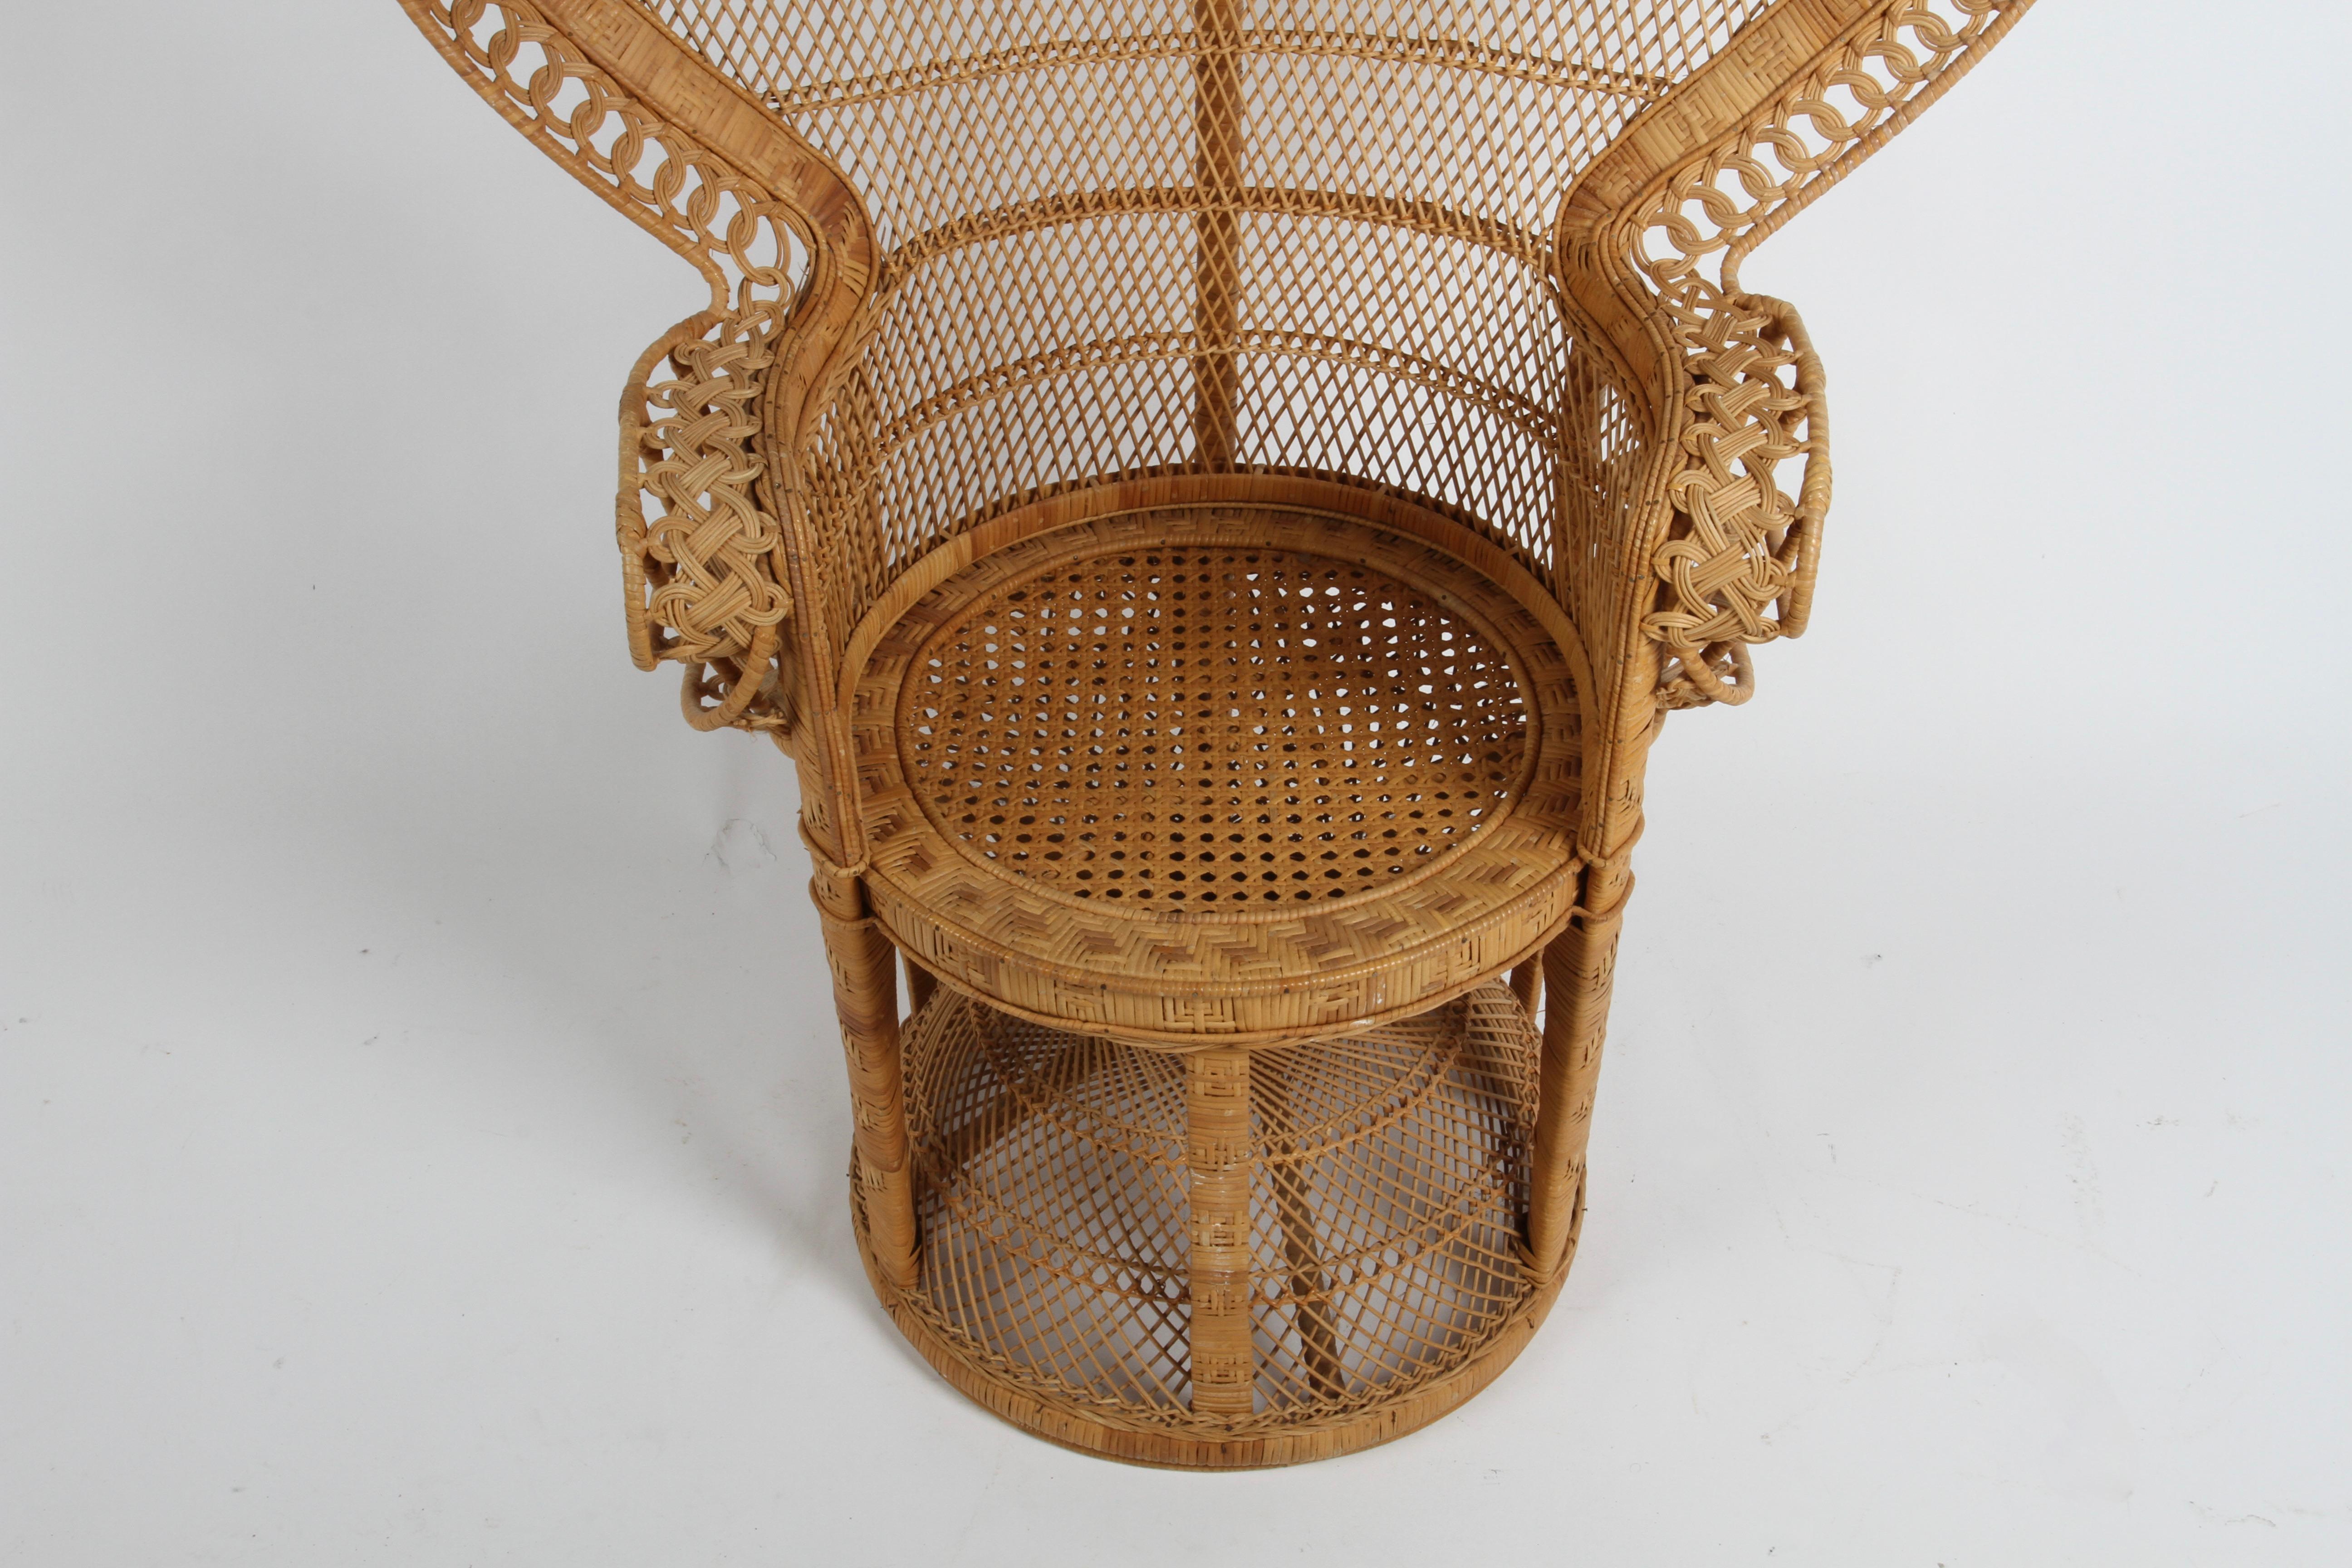 Philippine Vintage 1970s Rattan & Wicker Handcrafted Boho Chic Emmanuelle Peacock Chair